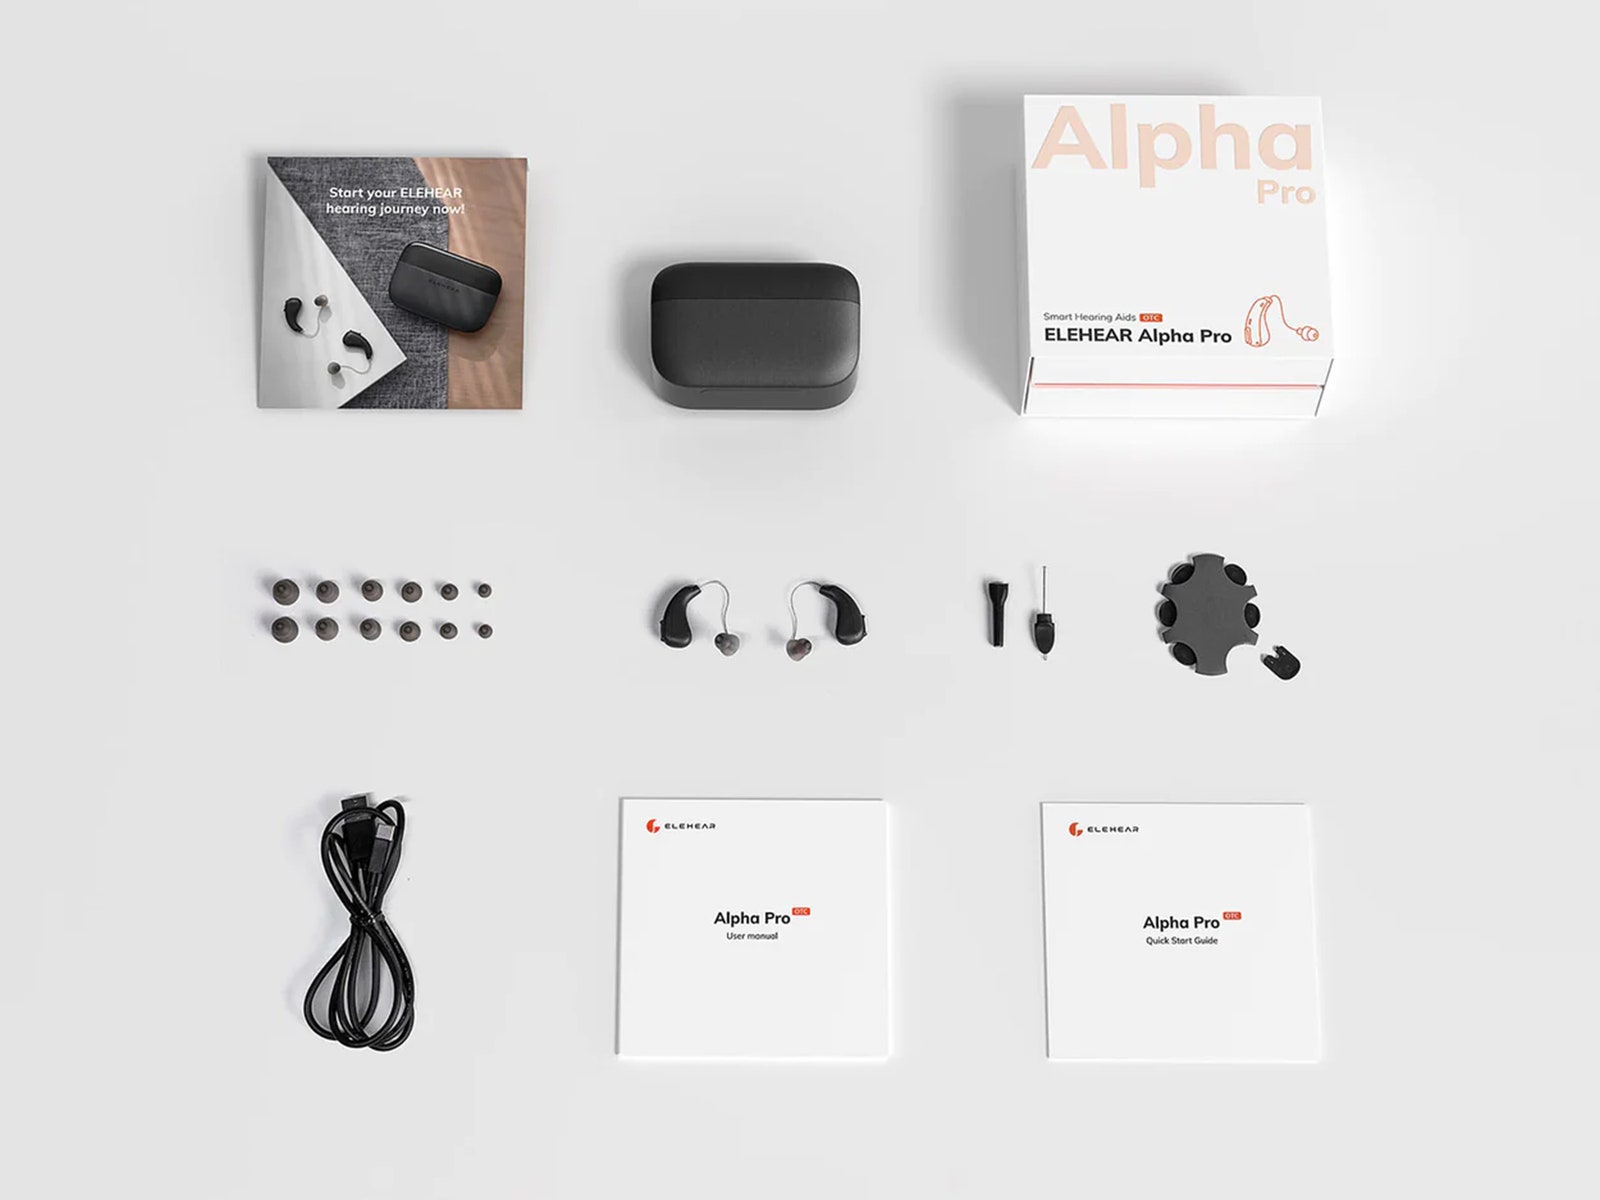 Overhead view of the headphone kit, including the headphone cushion case and instructions.